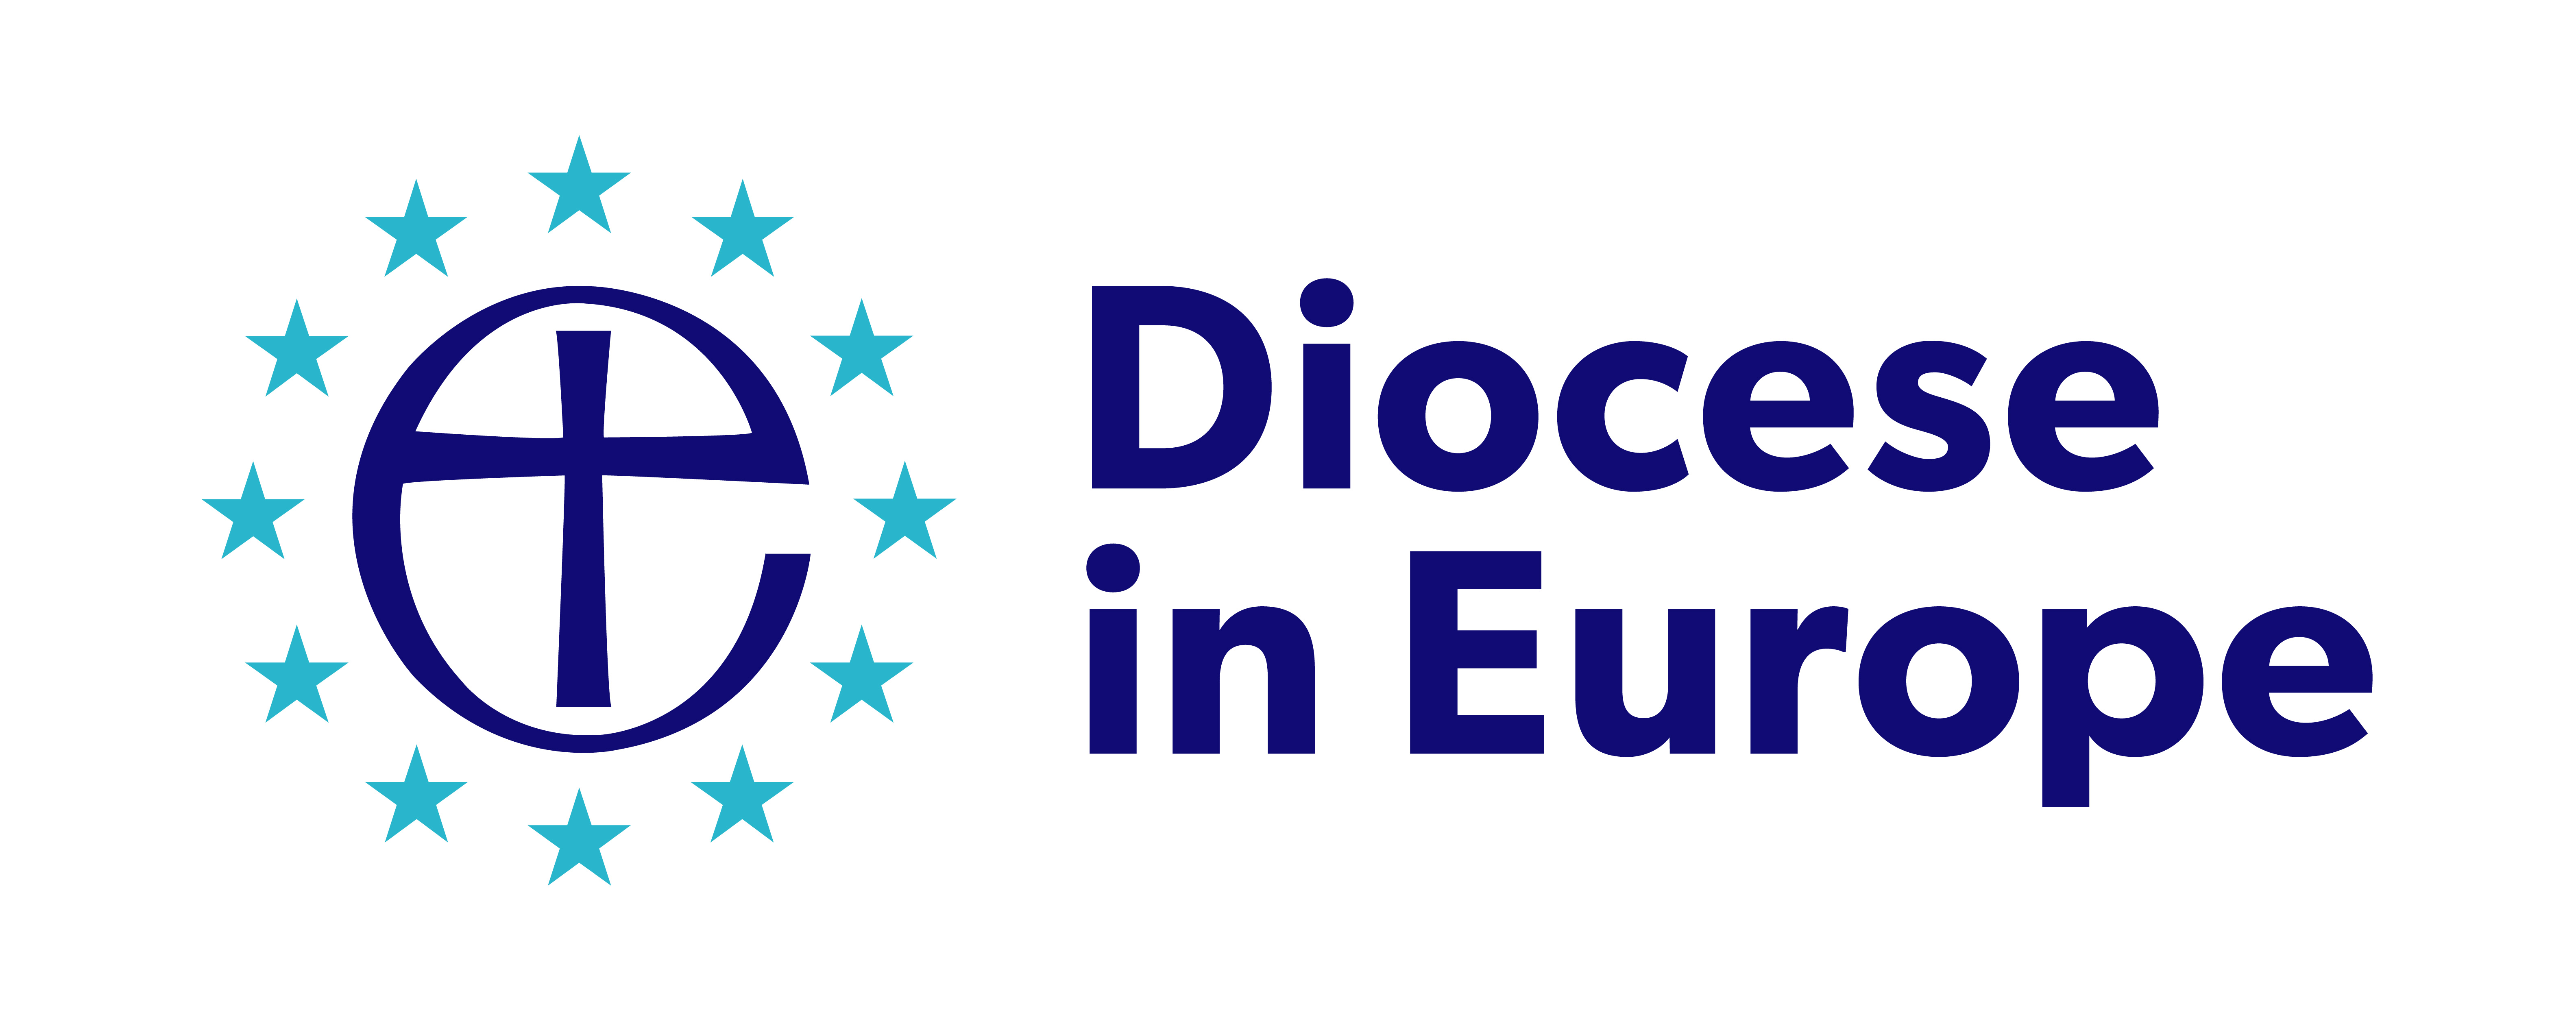 Diocese in Europe primary logo